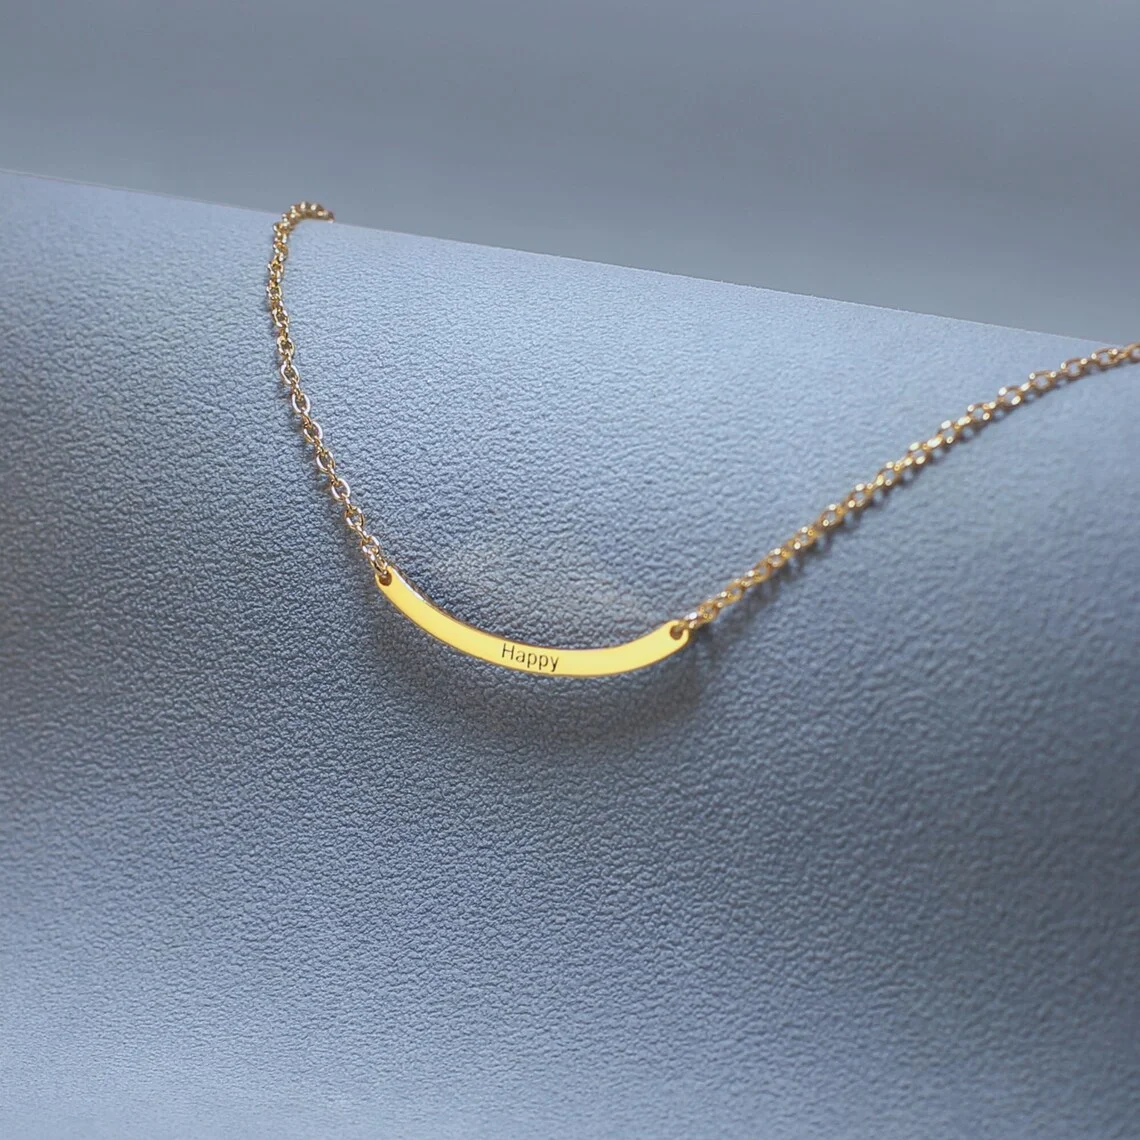 Personalized Curved Bar Necklace Stainless Steel Necklace Customized Jewelry Gift Gold Color Chain Bar Jewelry Pendant for Women new curved fit pants distress jean women s high waist personalized jeans trousers ropa de mujer barata y envío gratis ofertas